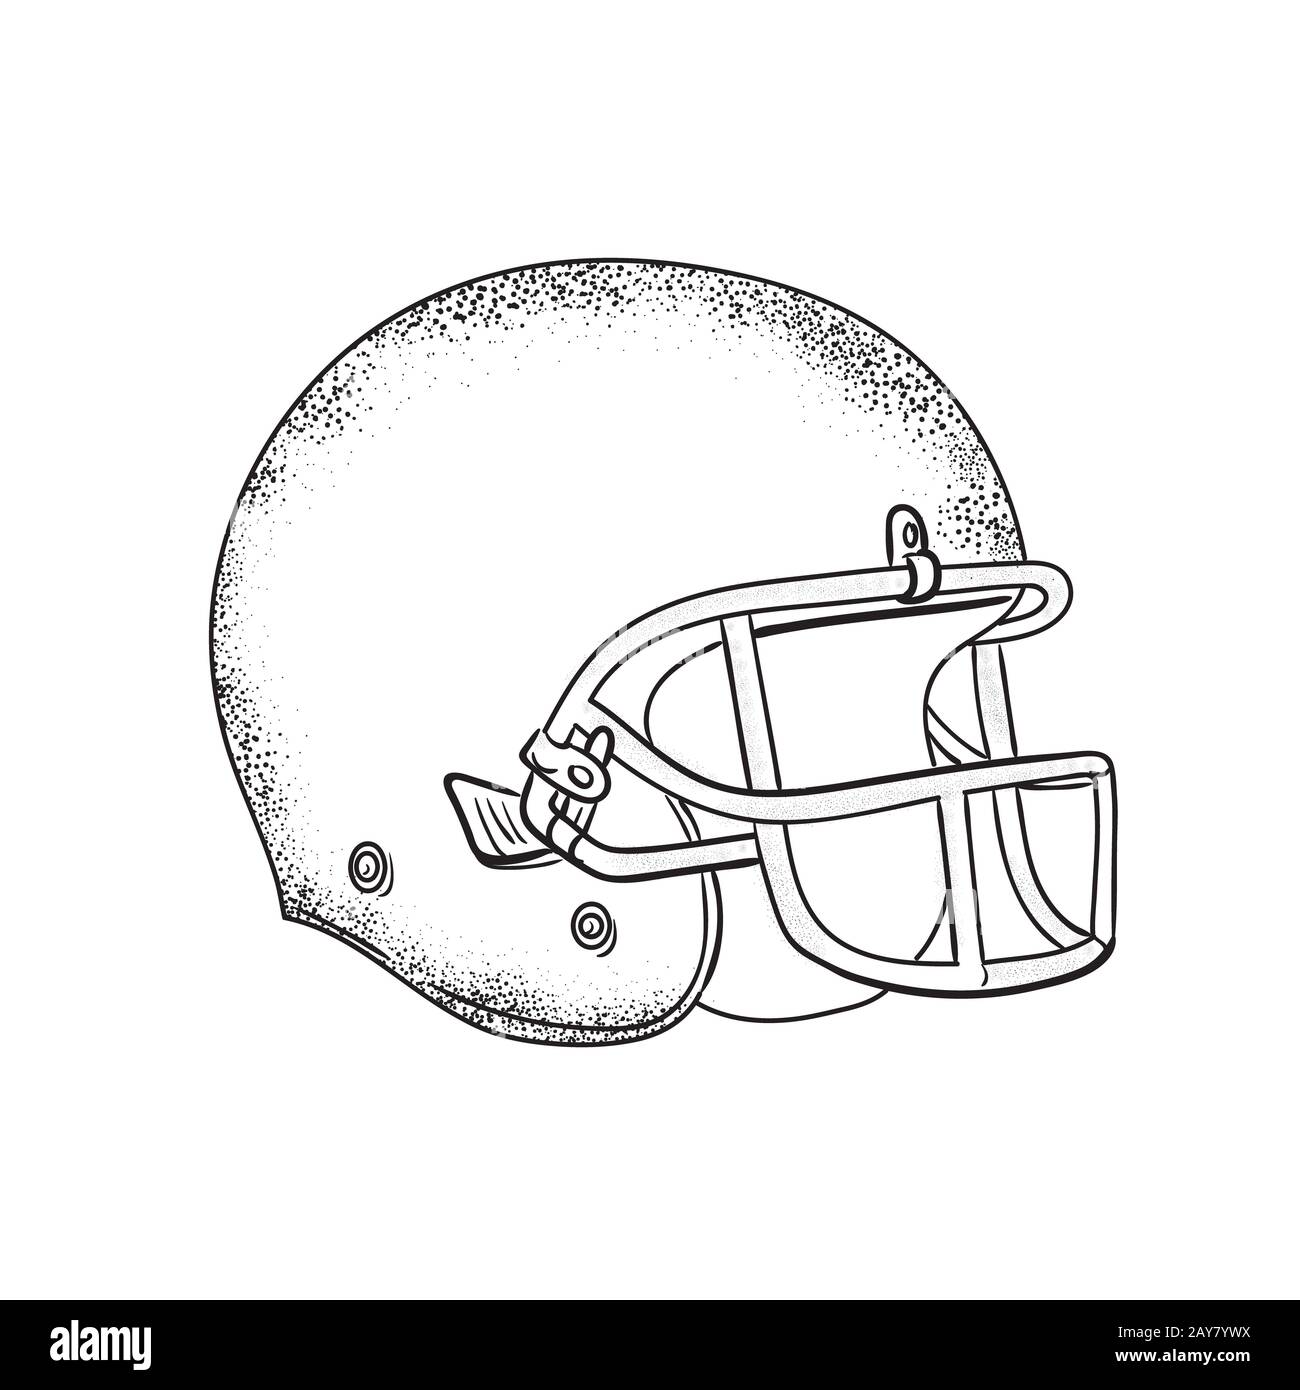 How to Draw Safety Helmet in Easy Steps  YouTube